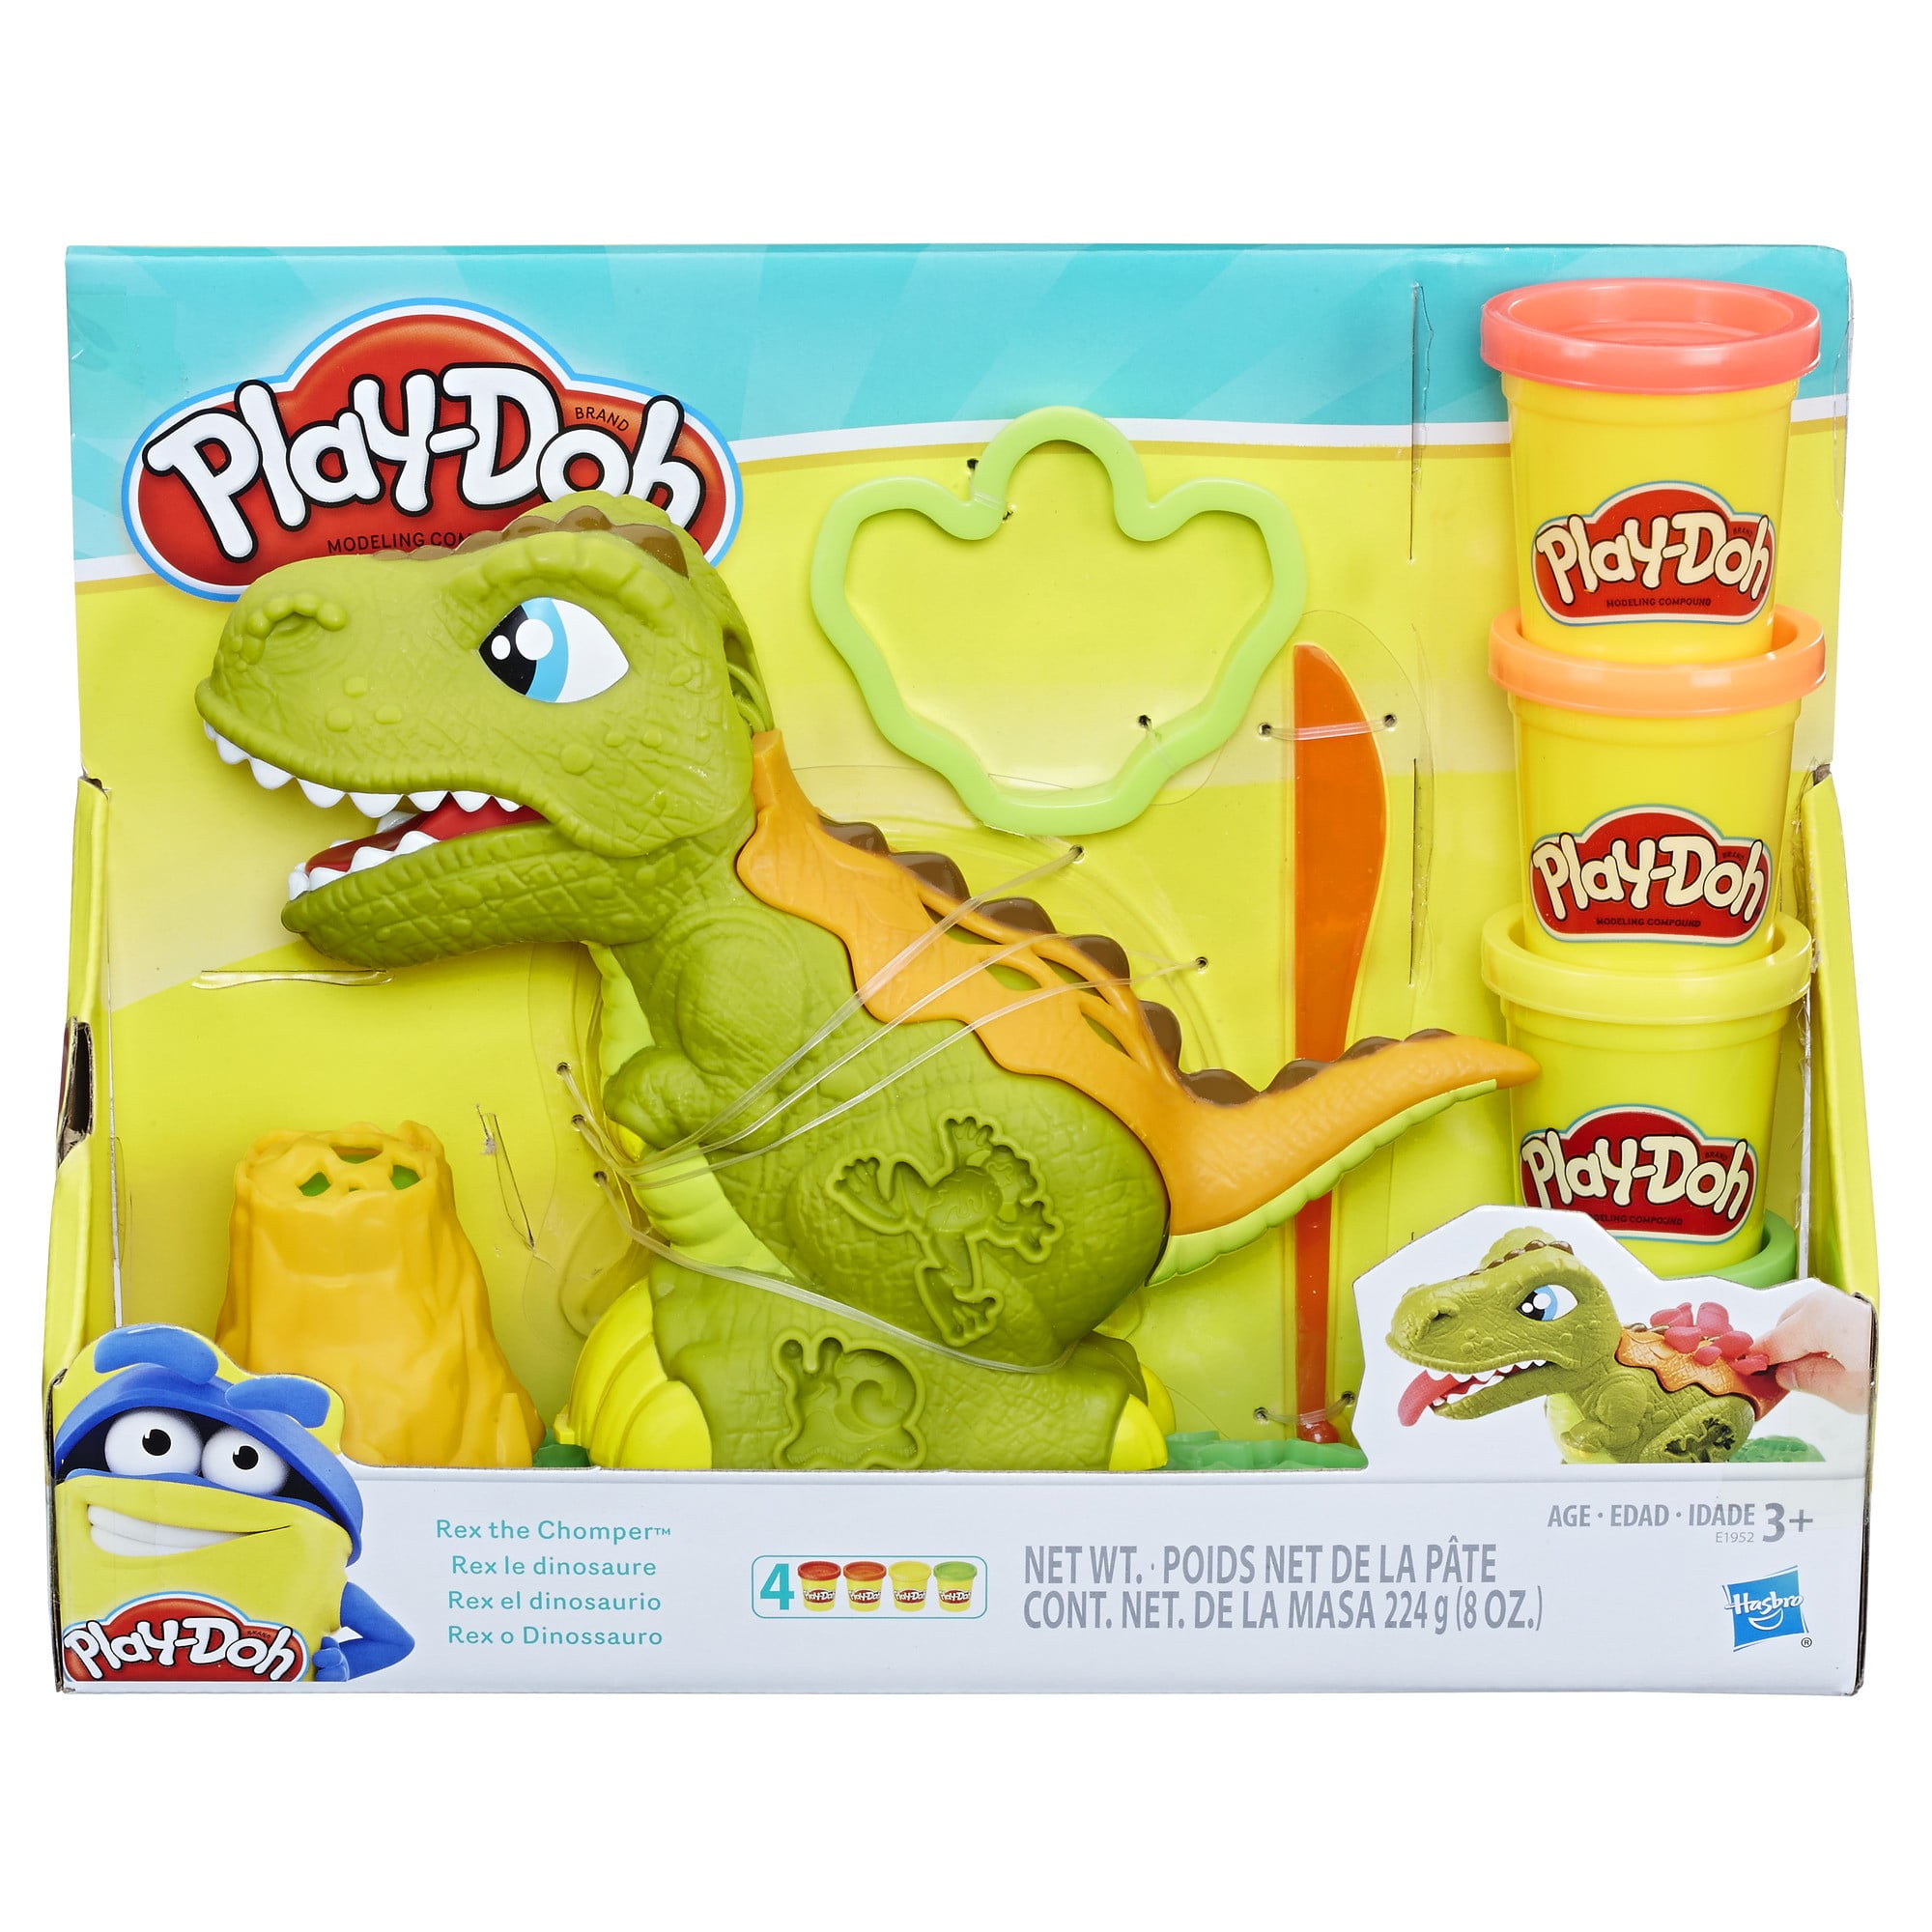 Non-Toxic 2.5 Ounces Each Play-Doh Dino Crew Crunchin T-Rex Toy for Kids 3 Years and Up with Funny Dinosaur Sounds and 3 Eggs